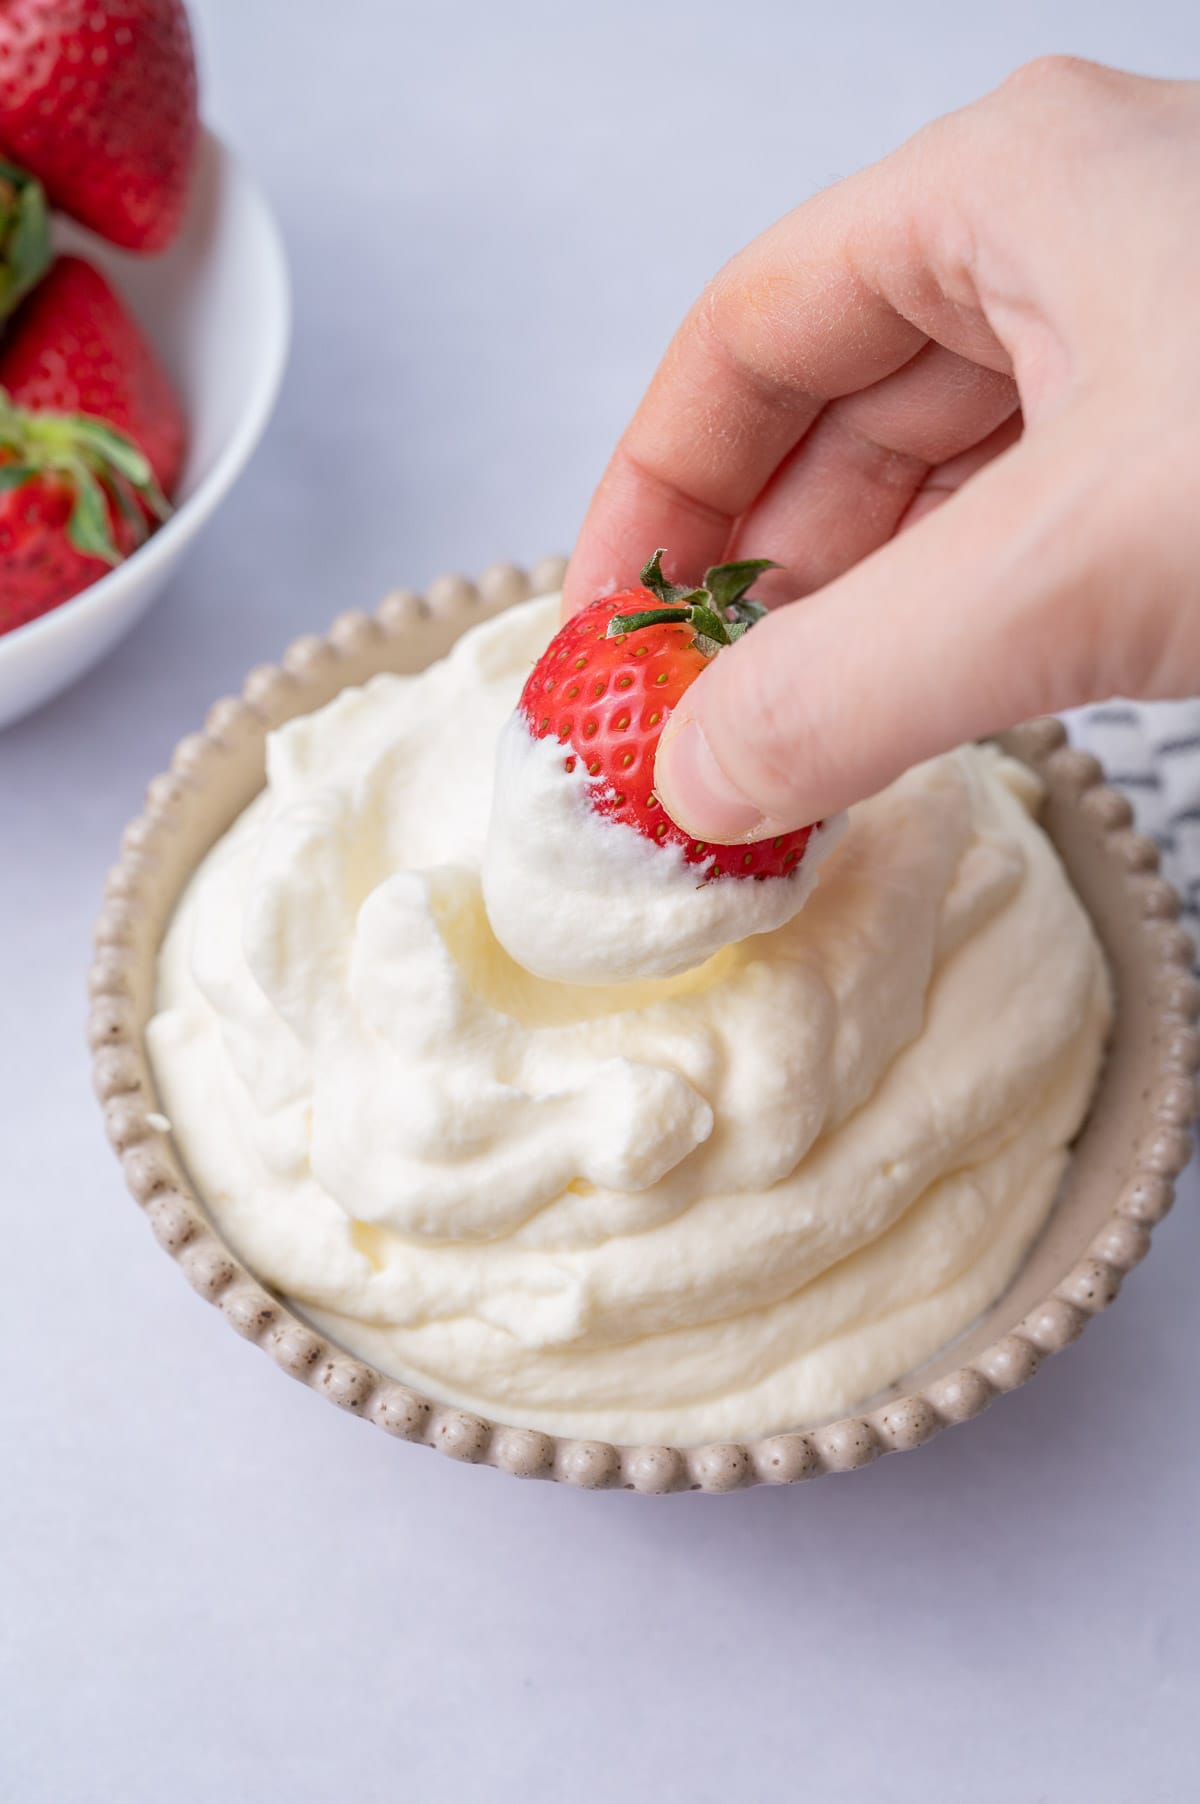 https://www.everyday-delicious.com/wp-content/uploads/2022/01/how-to-make-whipped-cream-everyday-delicious-2.jpg